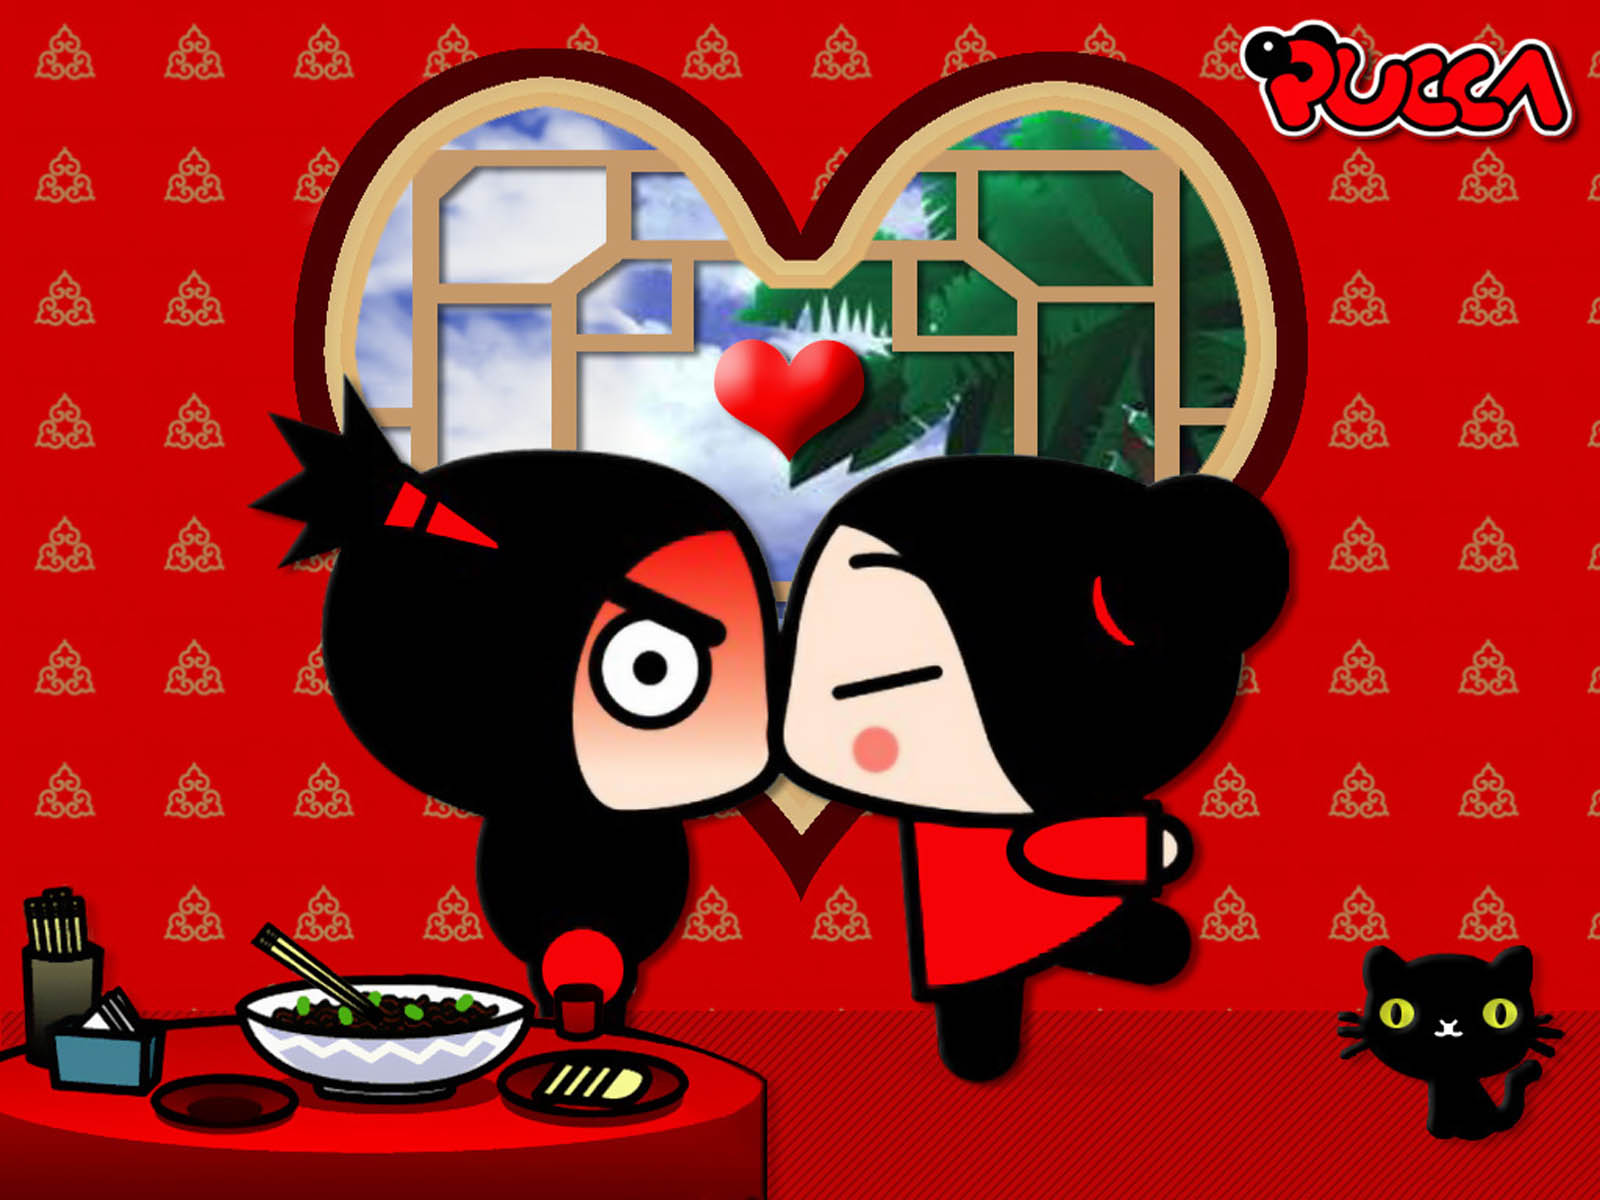 pucca wallpaper,cartoon,red,love,valentine's day,heart